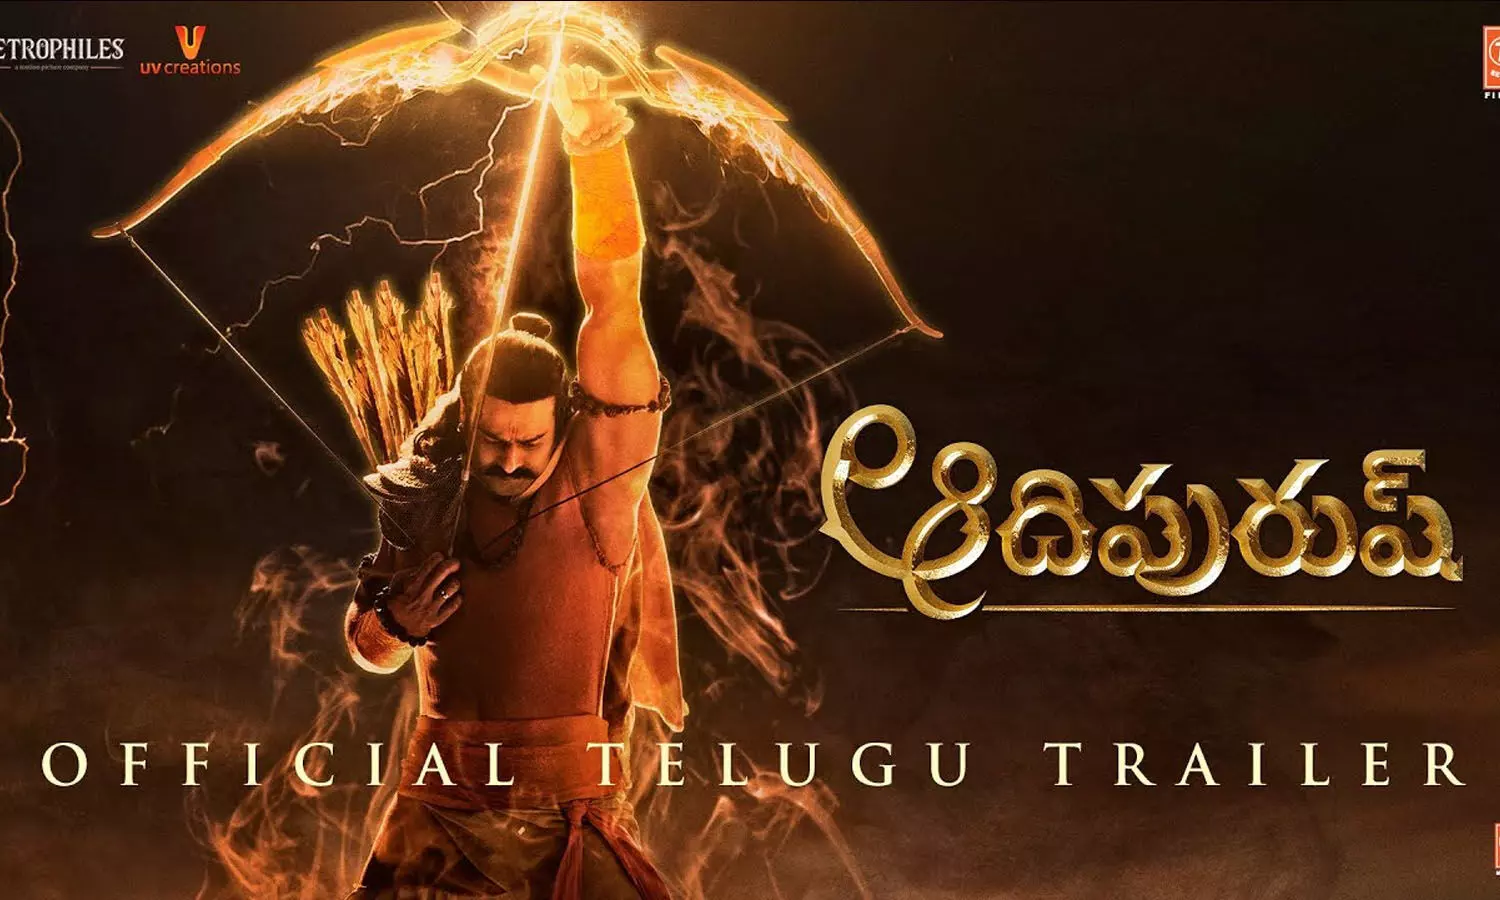 Prabhas Adipurush Trailer - Om Rauts directorial offers a grand visual experience of an epic tale